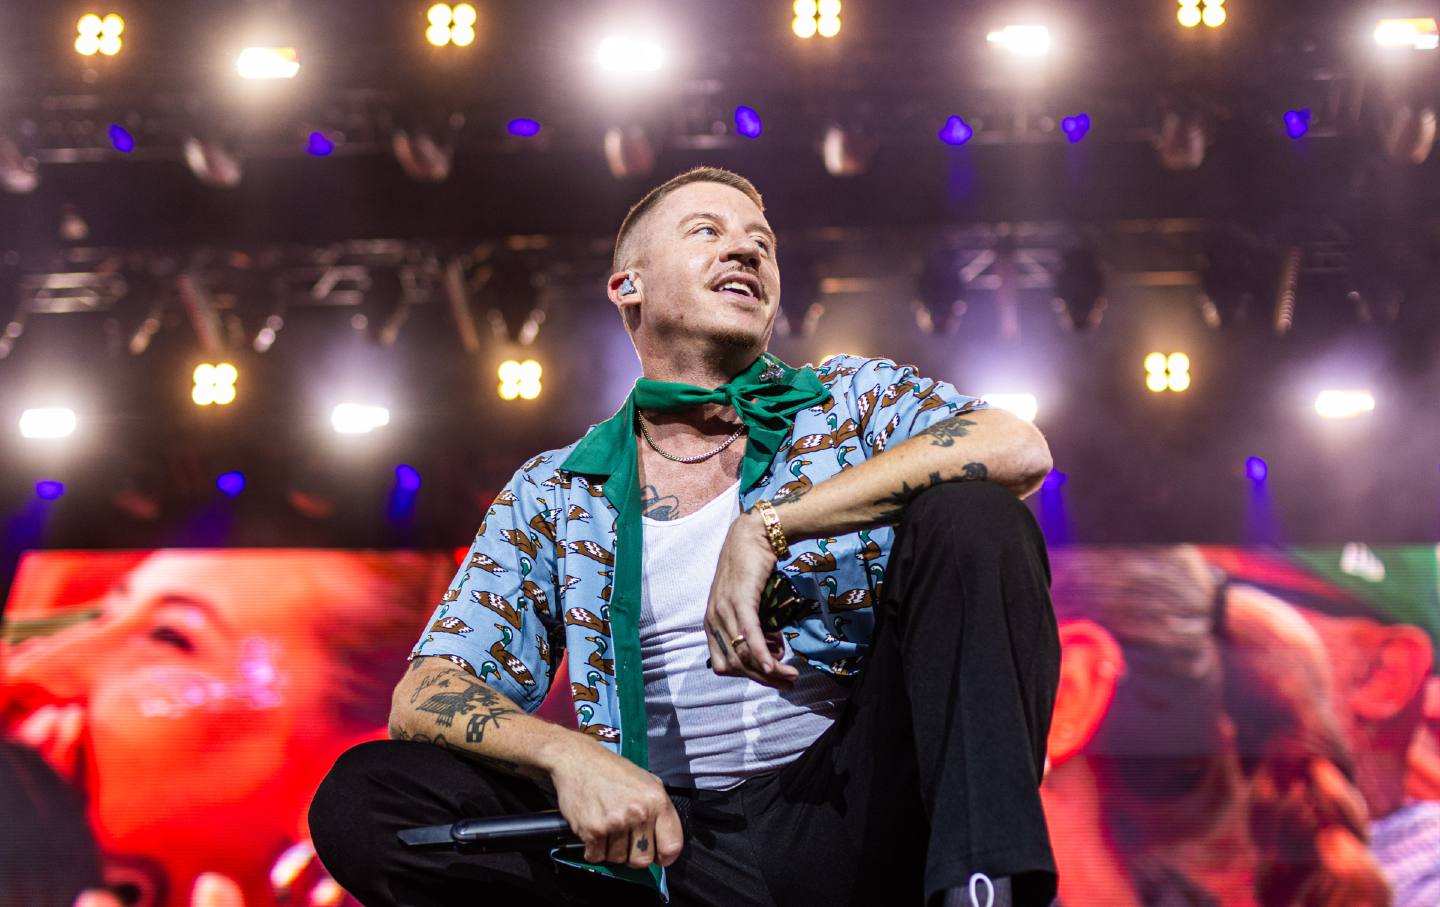 Macklemore onstage with a delightful duck-print short-sleeve shirt.